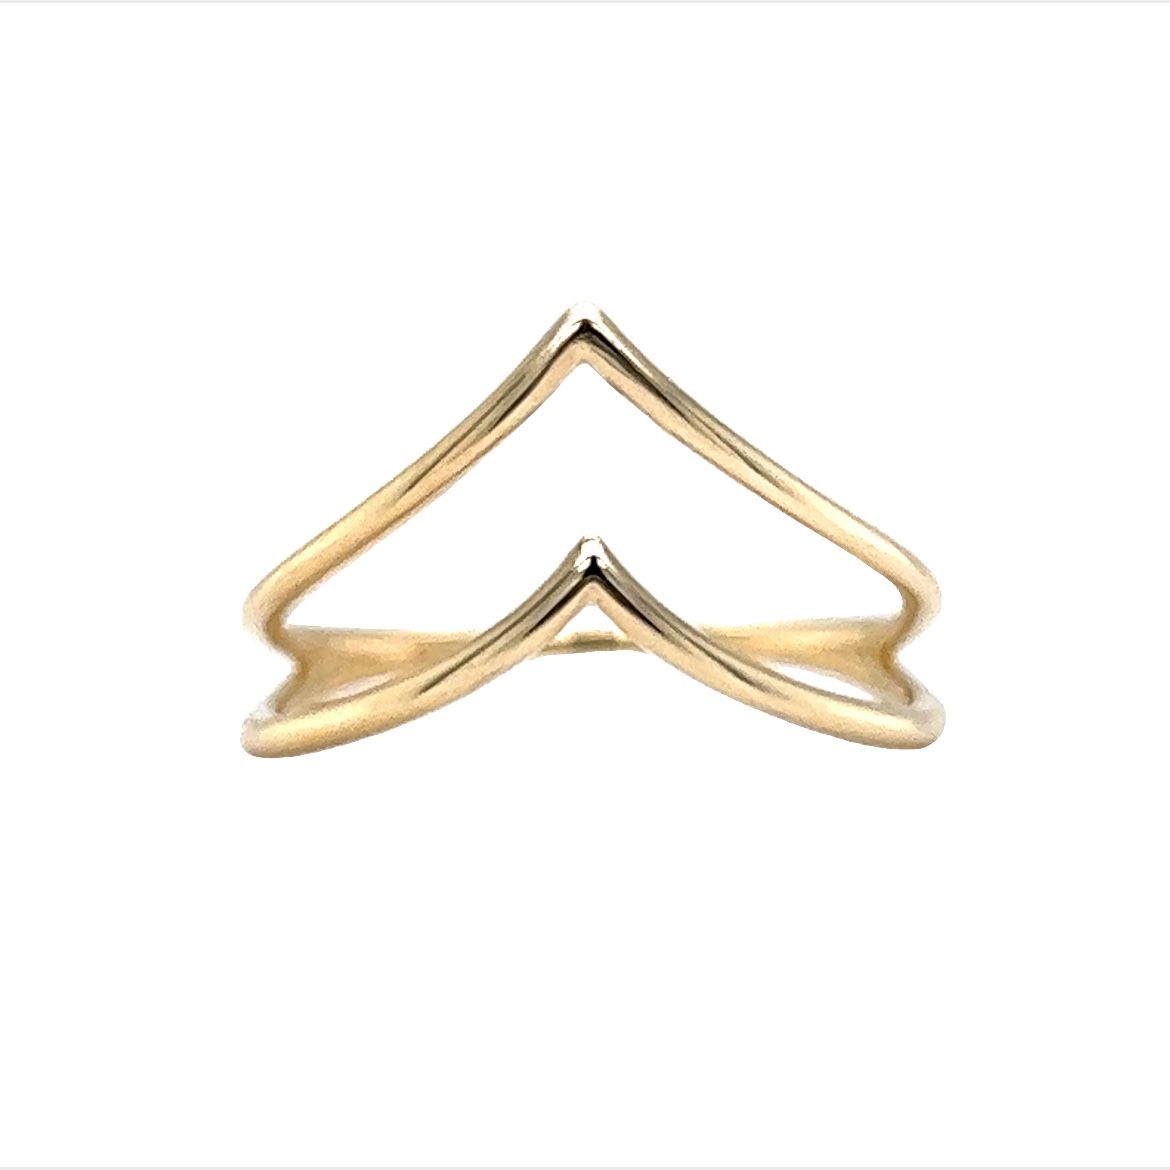 Double V Shaped Contour Wedding Band in 14k Yellow Gold